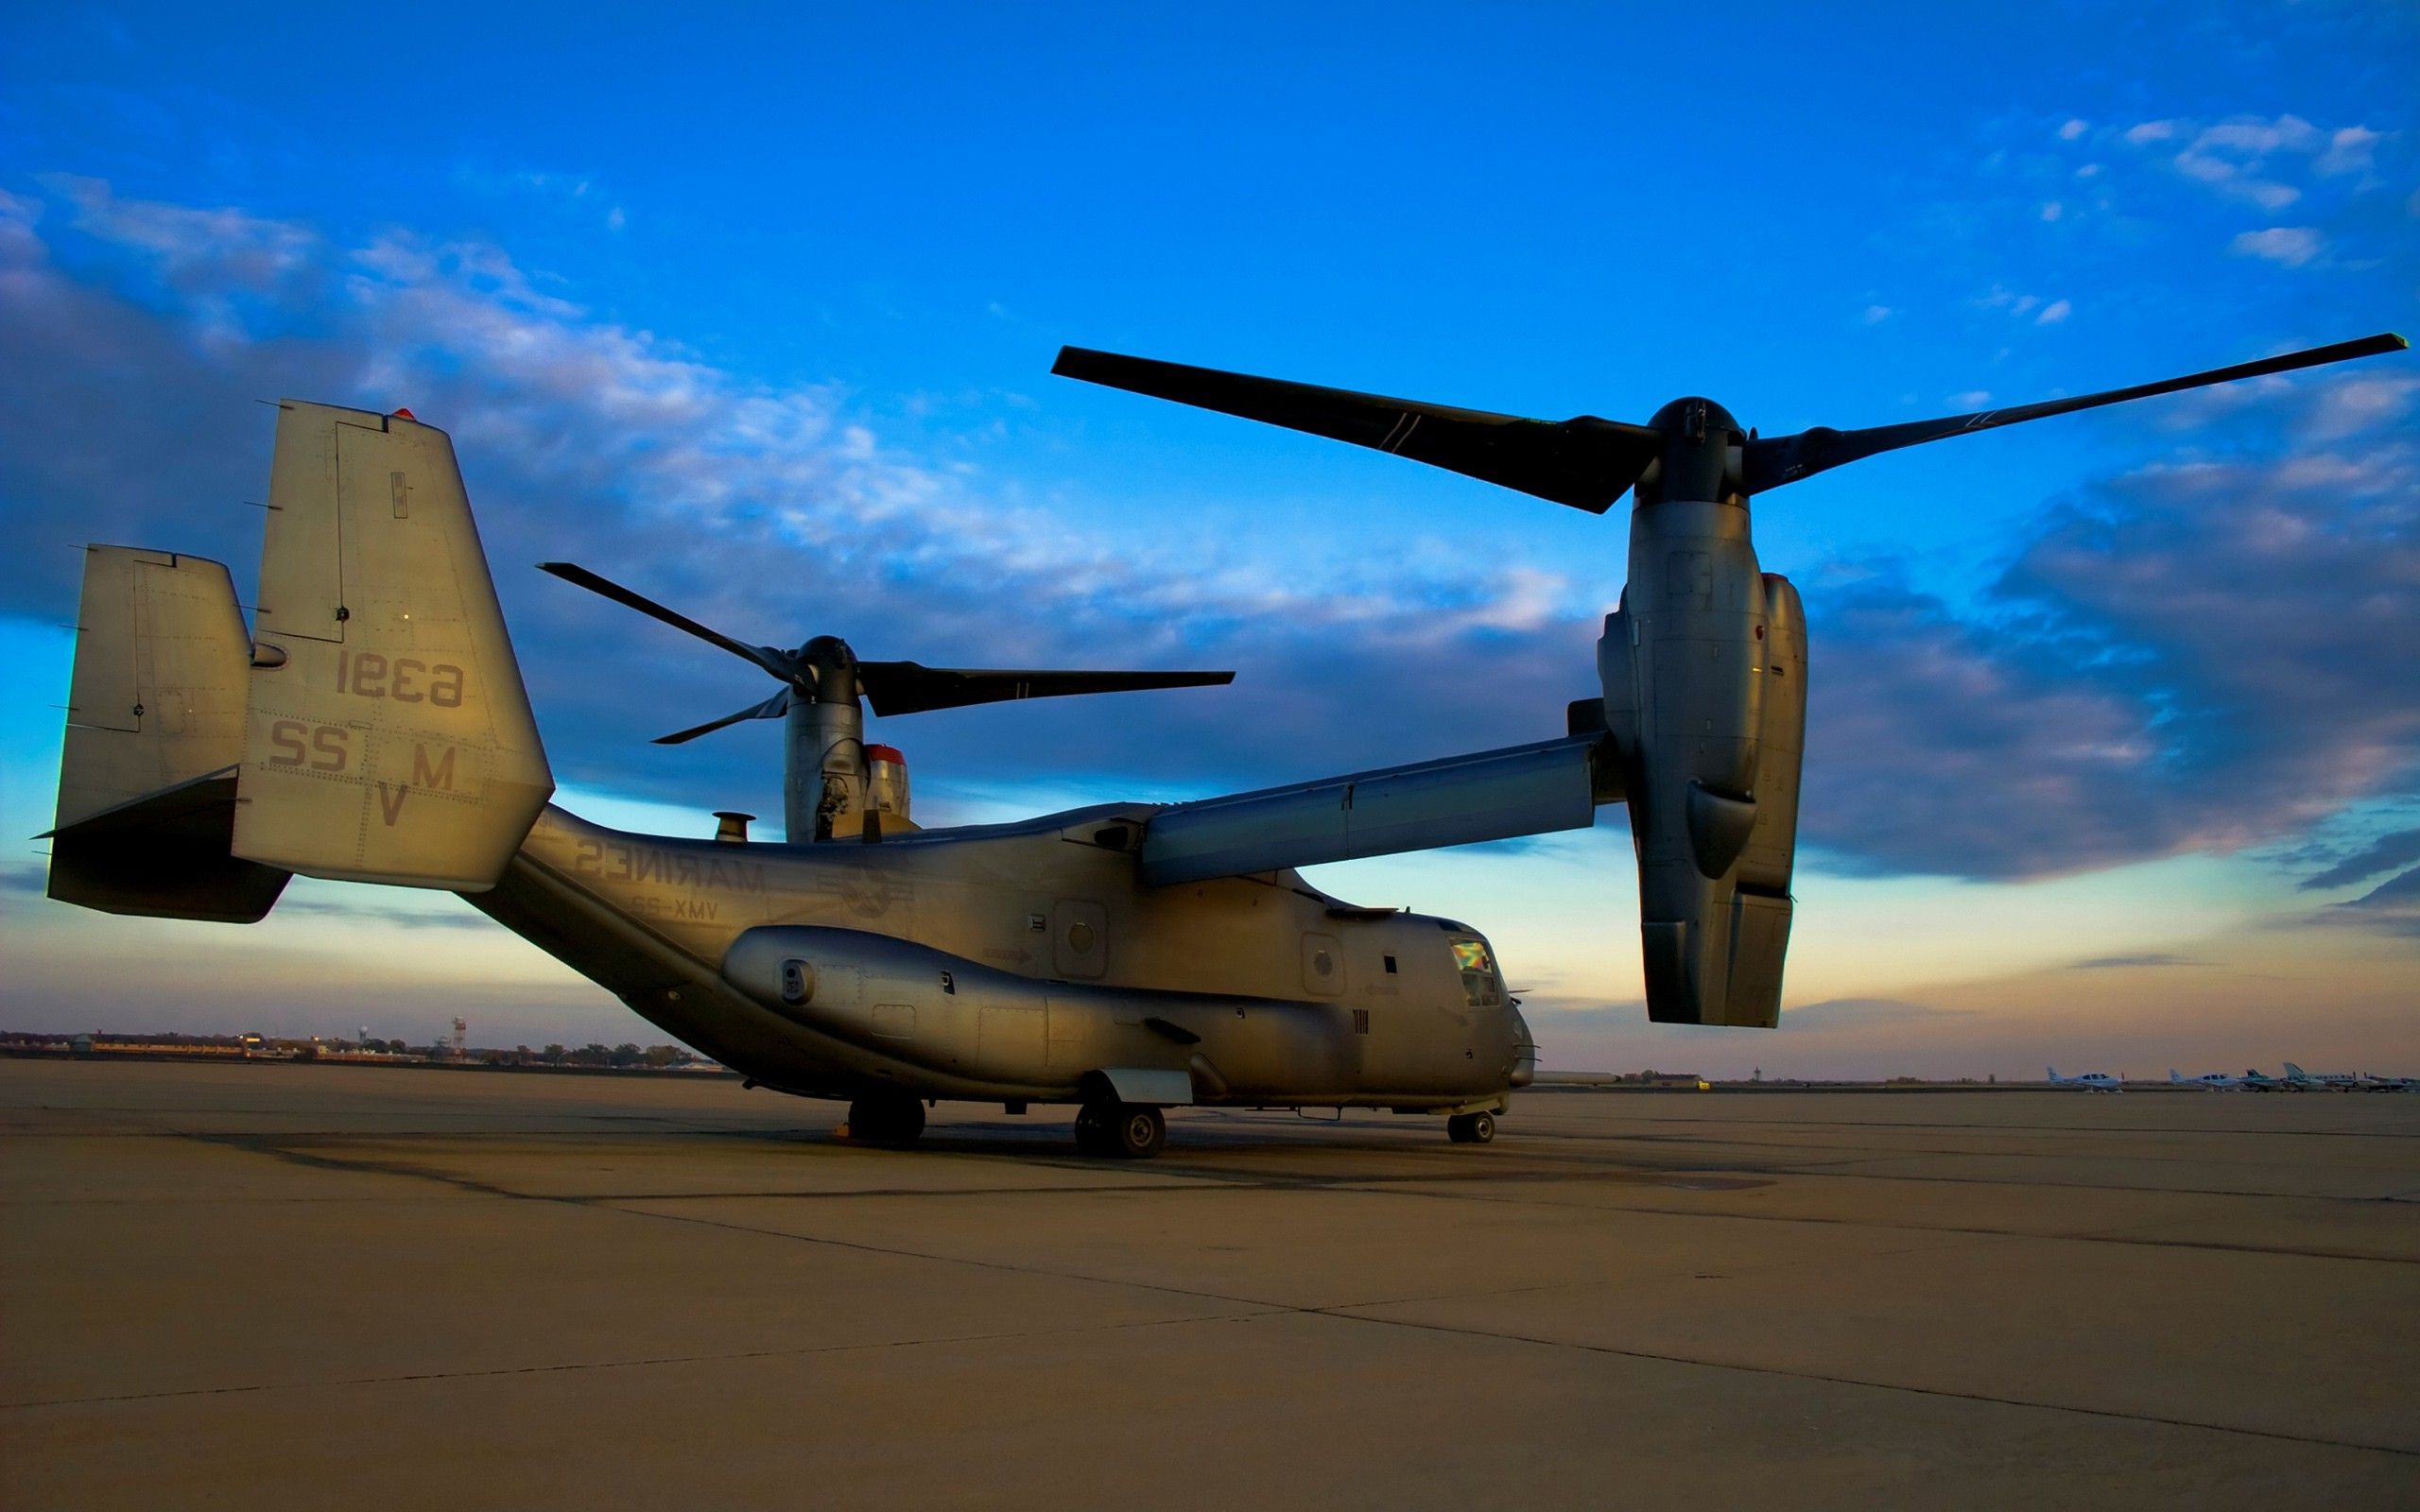 Wallpaper, sky, airplane, propeller, military aircraft, air force, CV 22 Osprey, Flight, aviation, airline, 2560x1600 px, aircraft engine, air travel, mode of transport, aerospace engineering, helicopter rotor, rotorcraft, military helicopter, military